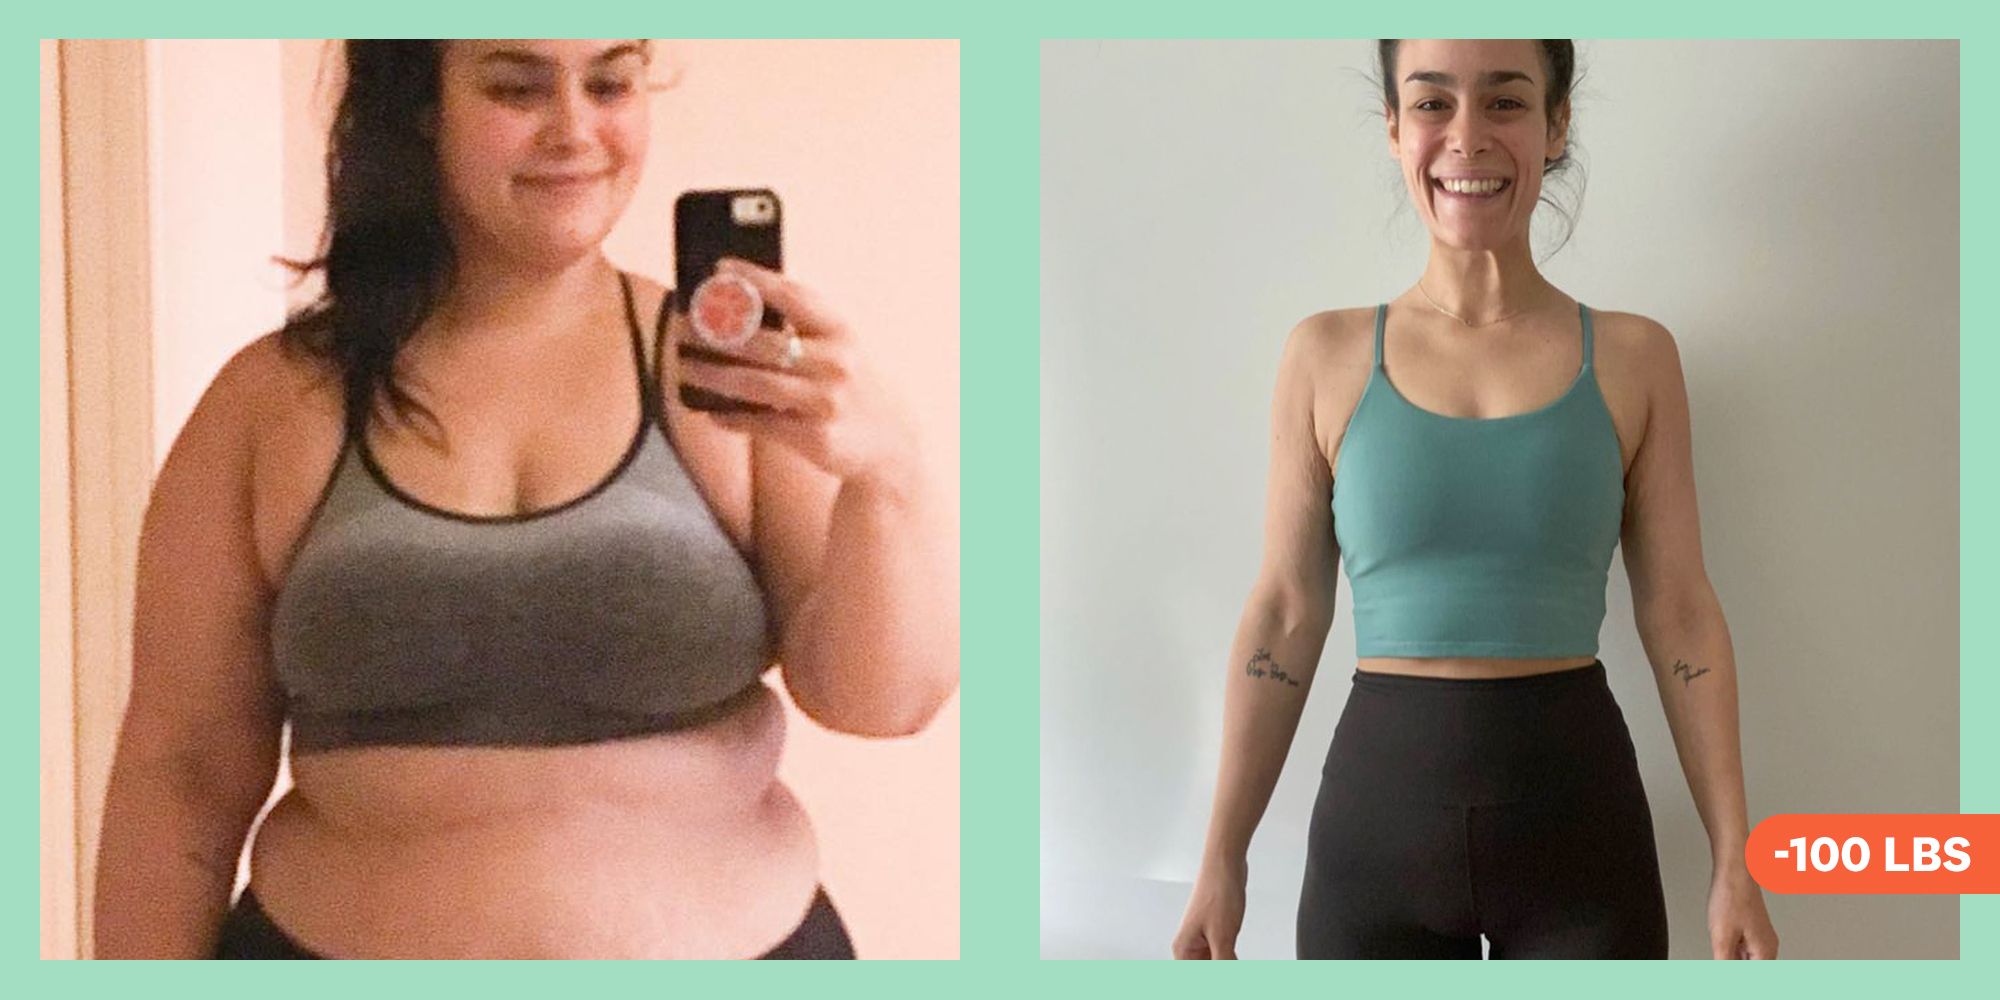 I Went Back To The Basics Of Healthy Eating And Started Running And Kickboxing To Lose 100 Pounds photo